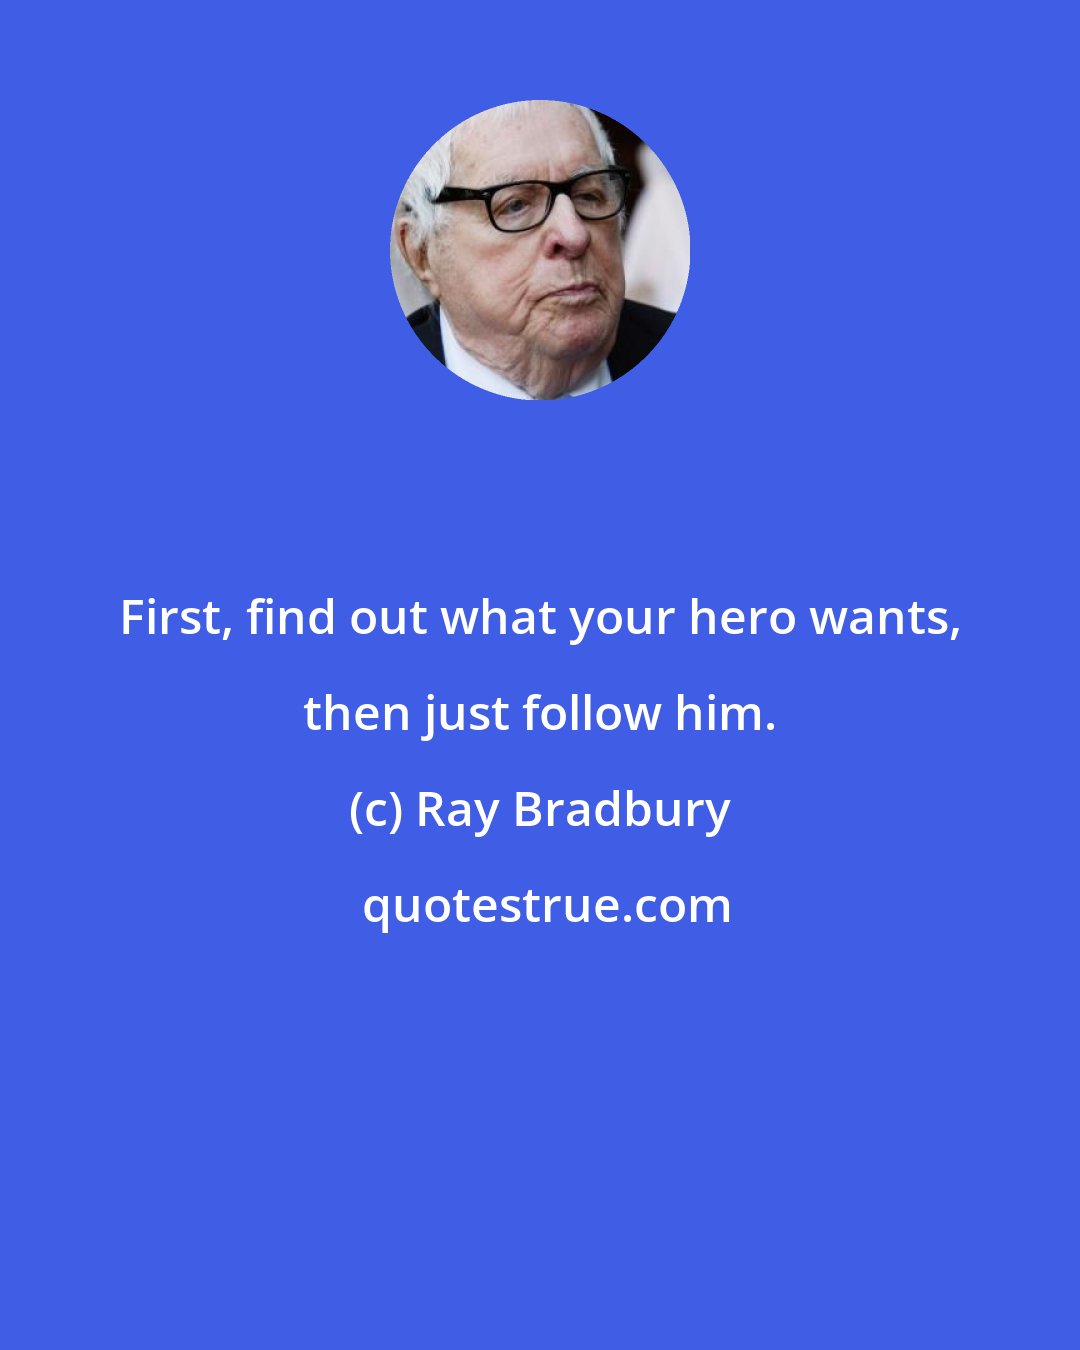 Ray Bradbury: First, find out what your hero wants, then just follow him.